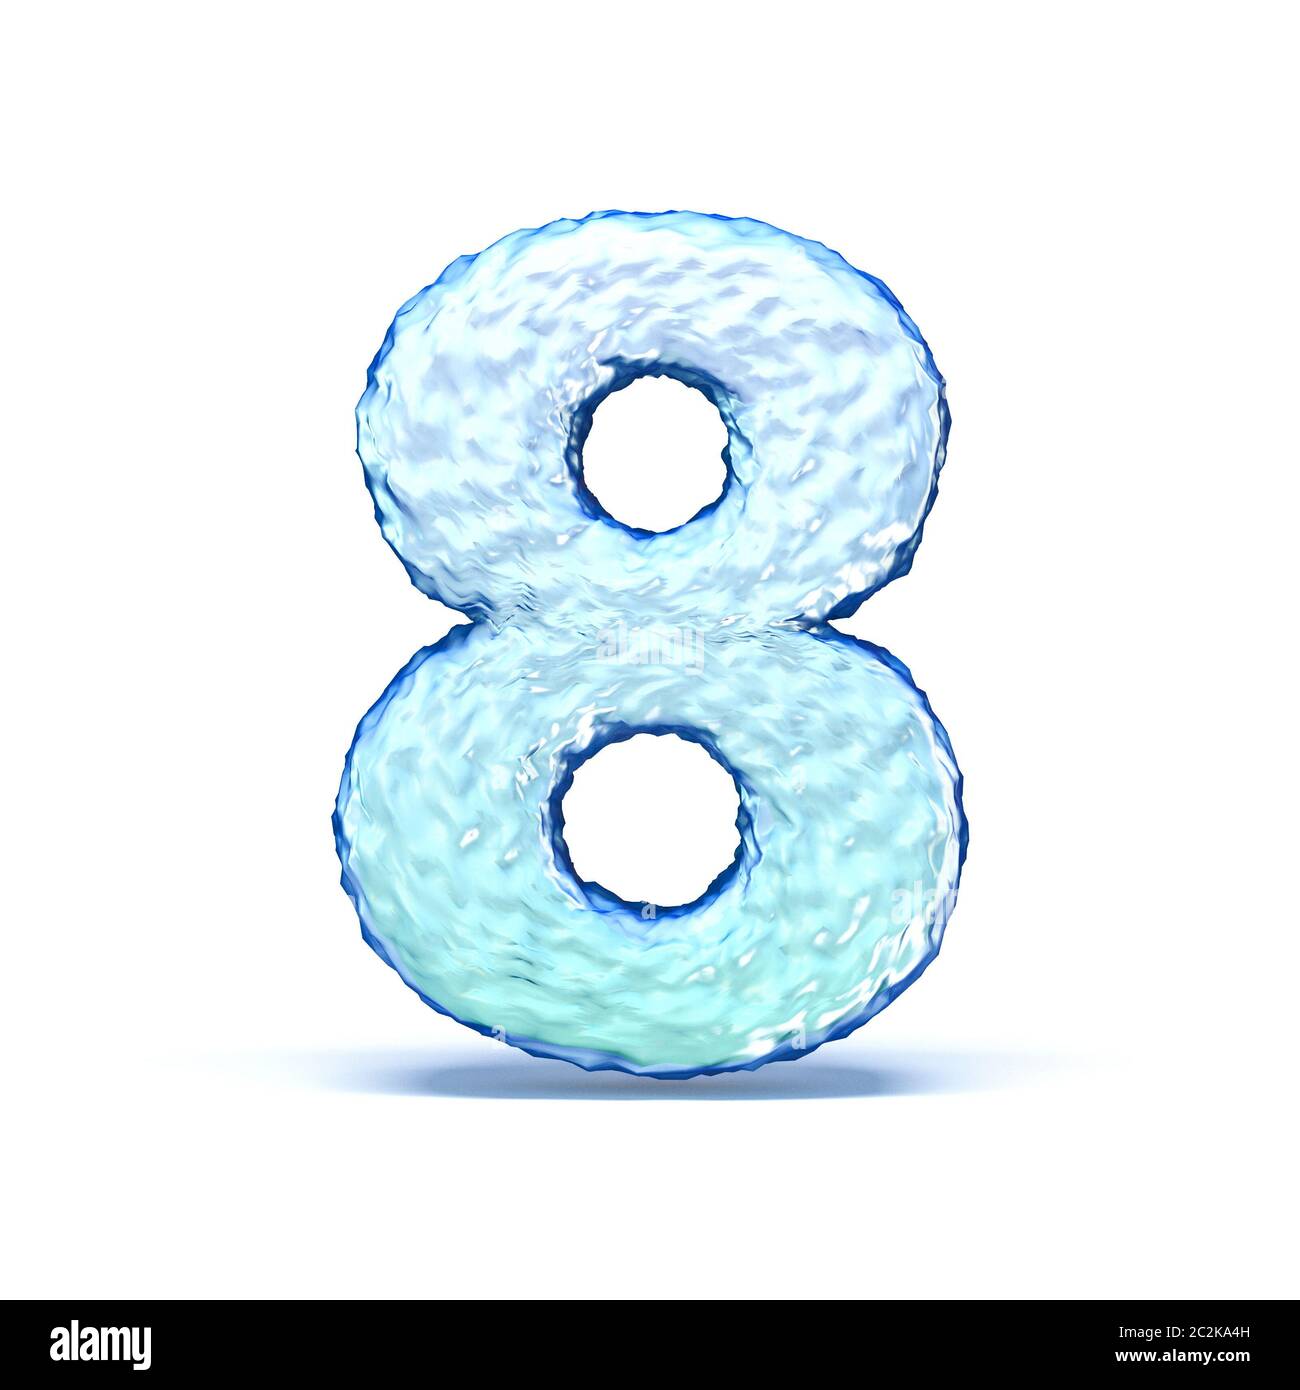 Ice crystal font Number 8 EIGHT 3D render illustration isolated on white background Stock Photo